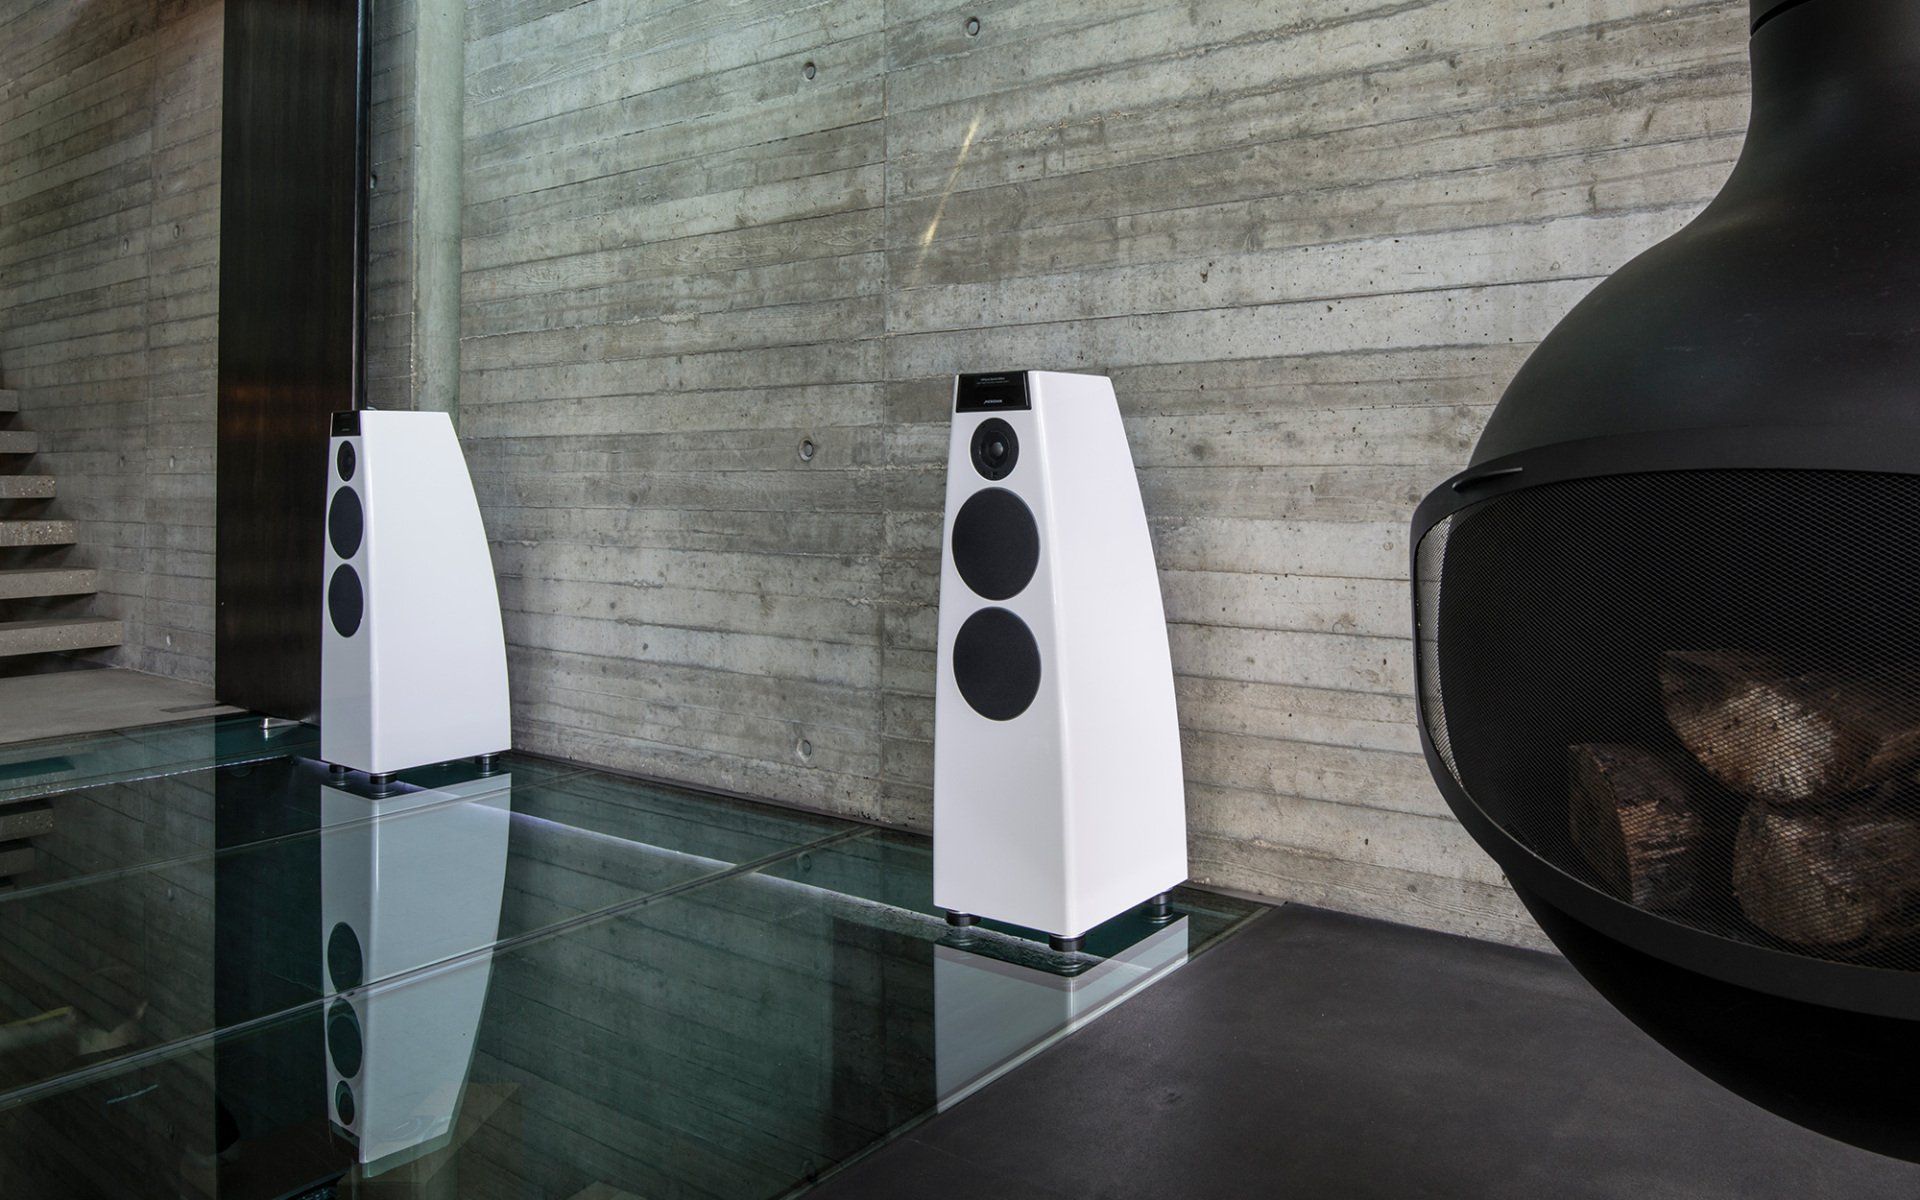 Two white speakers are sitting on a glass floor next to a fireplace.